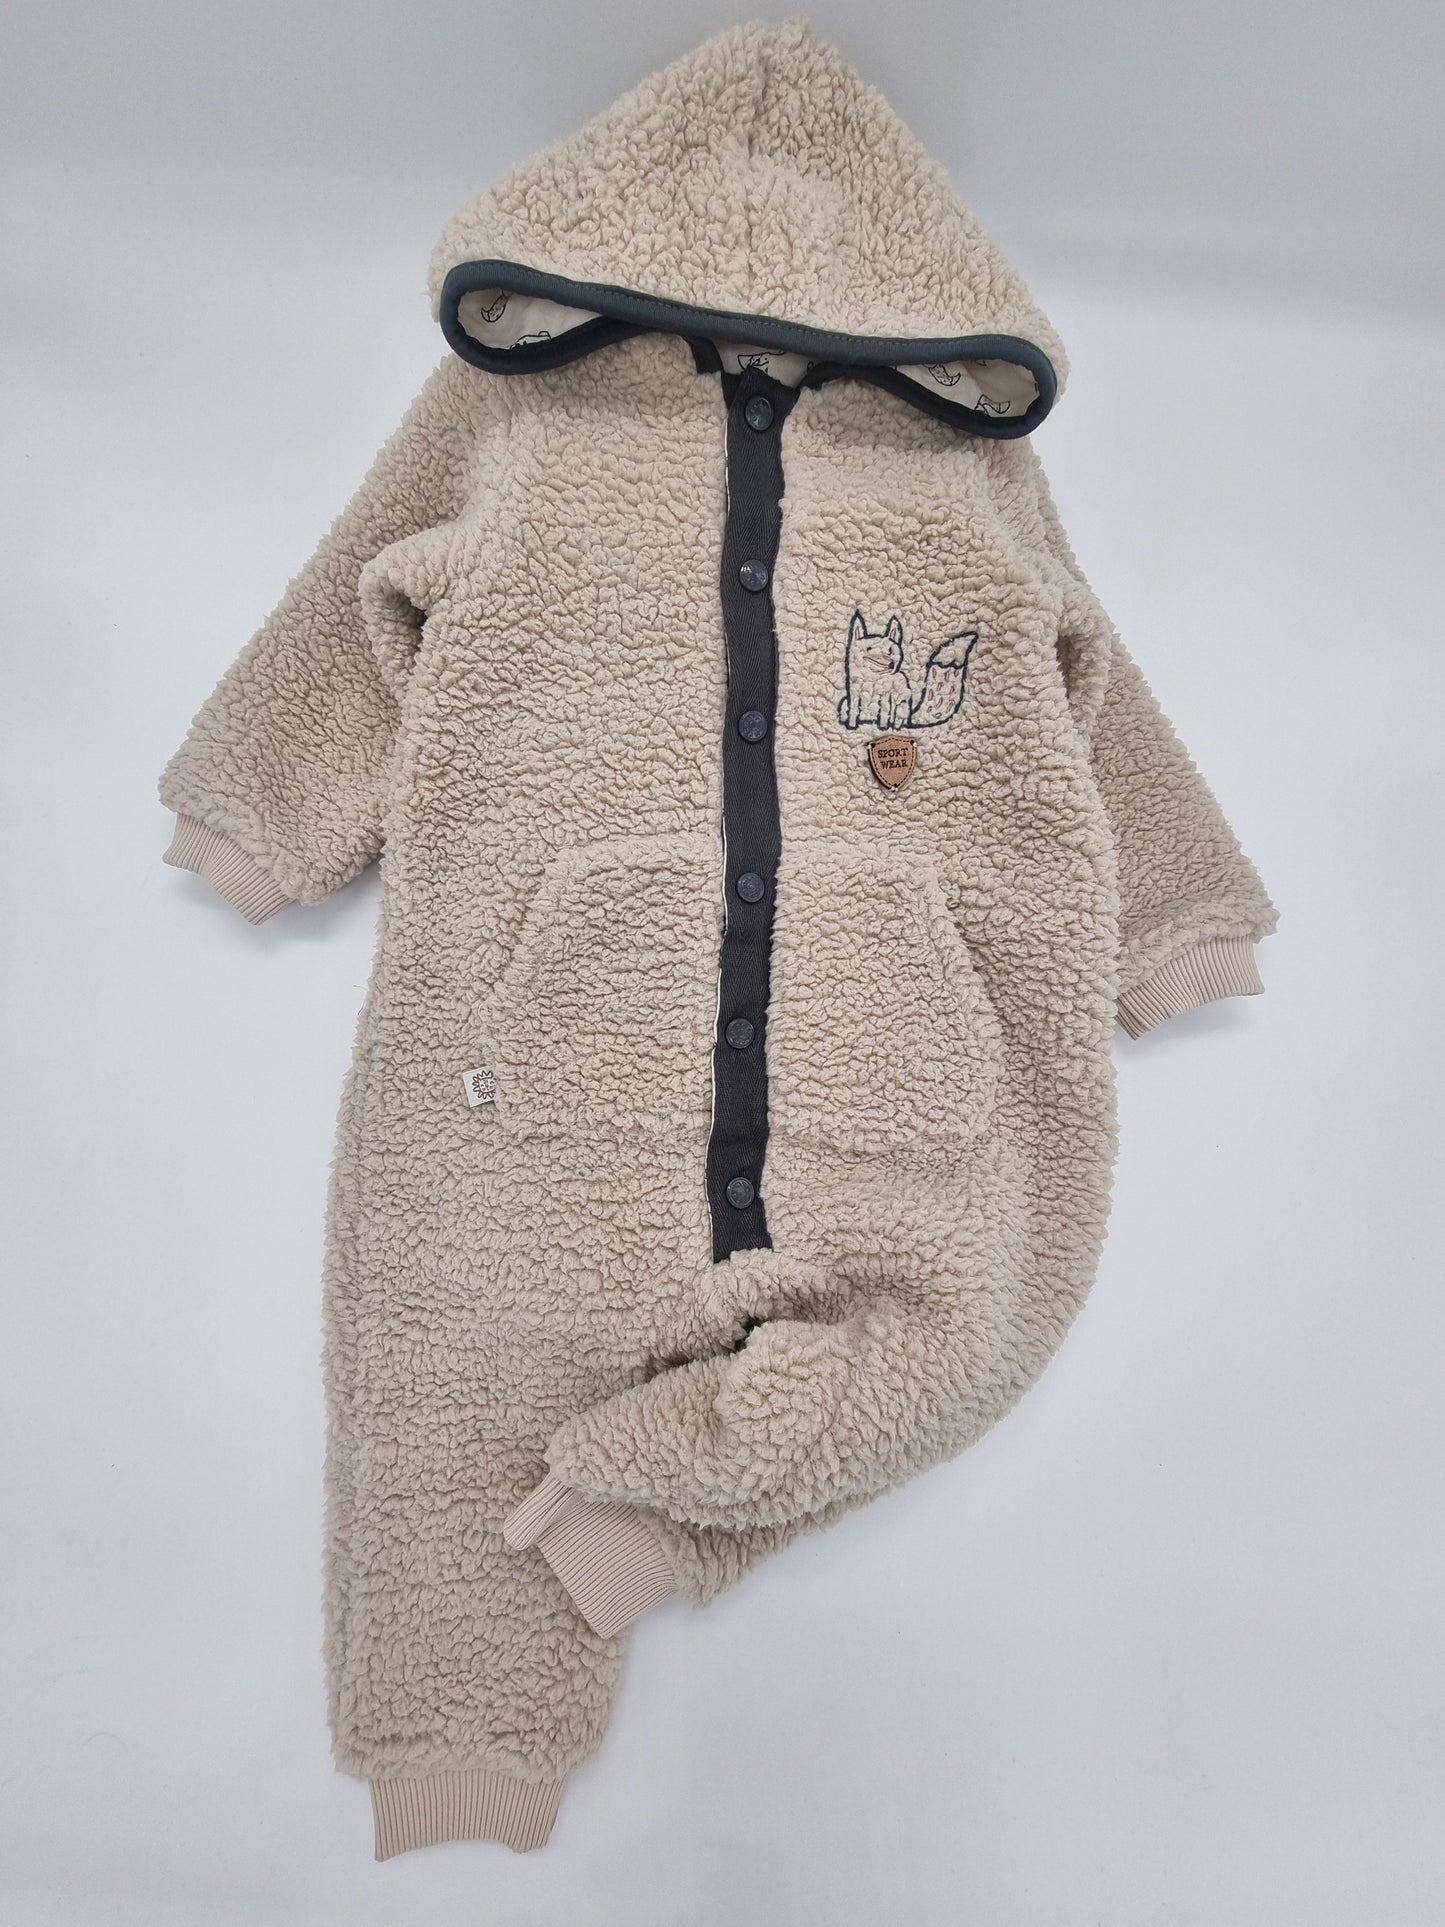 Warm Knit Long Sleeve Hooded Baby Jumpsuit